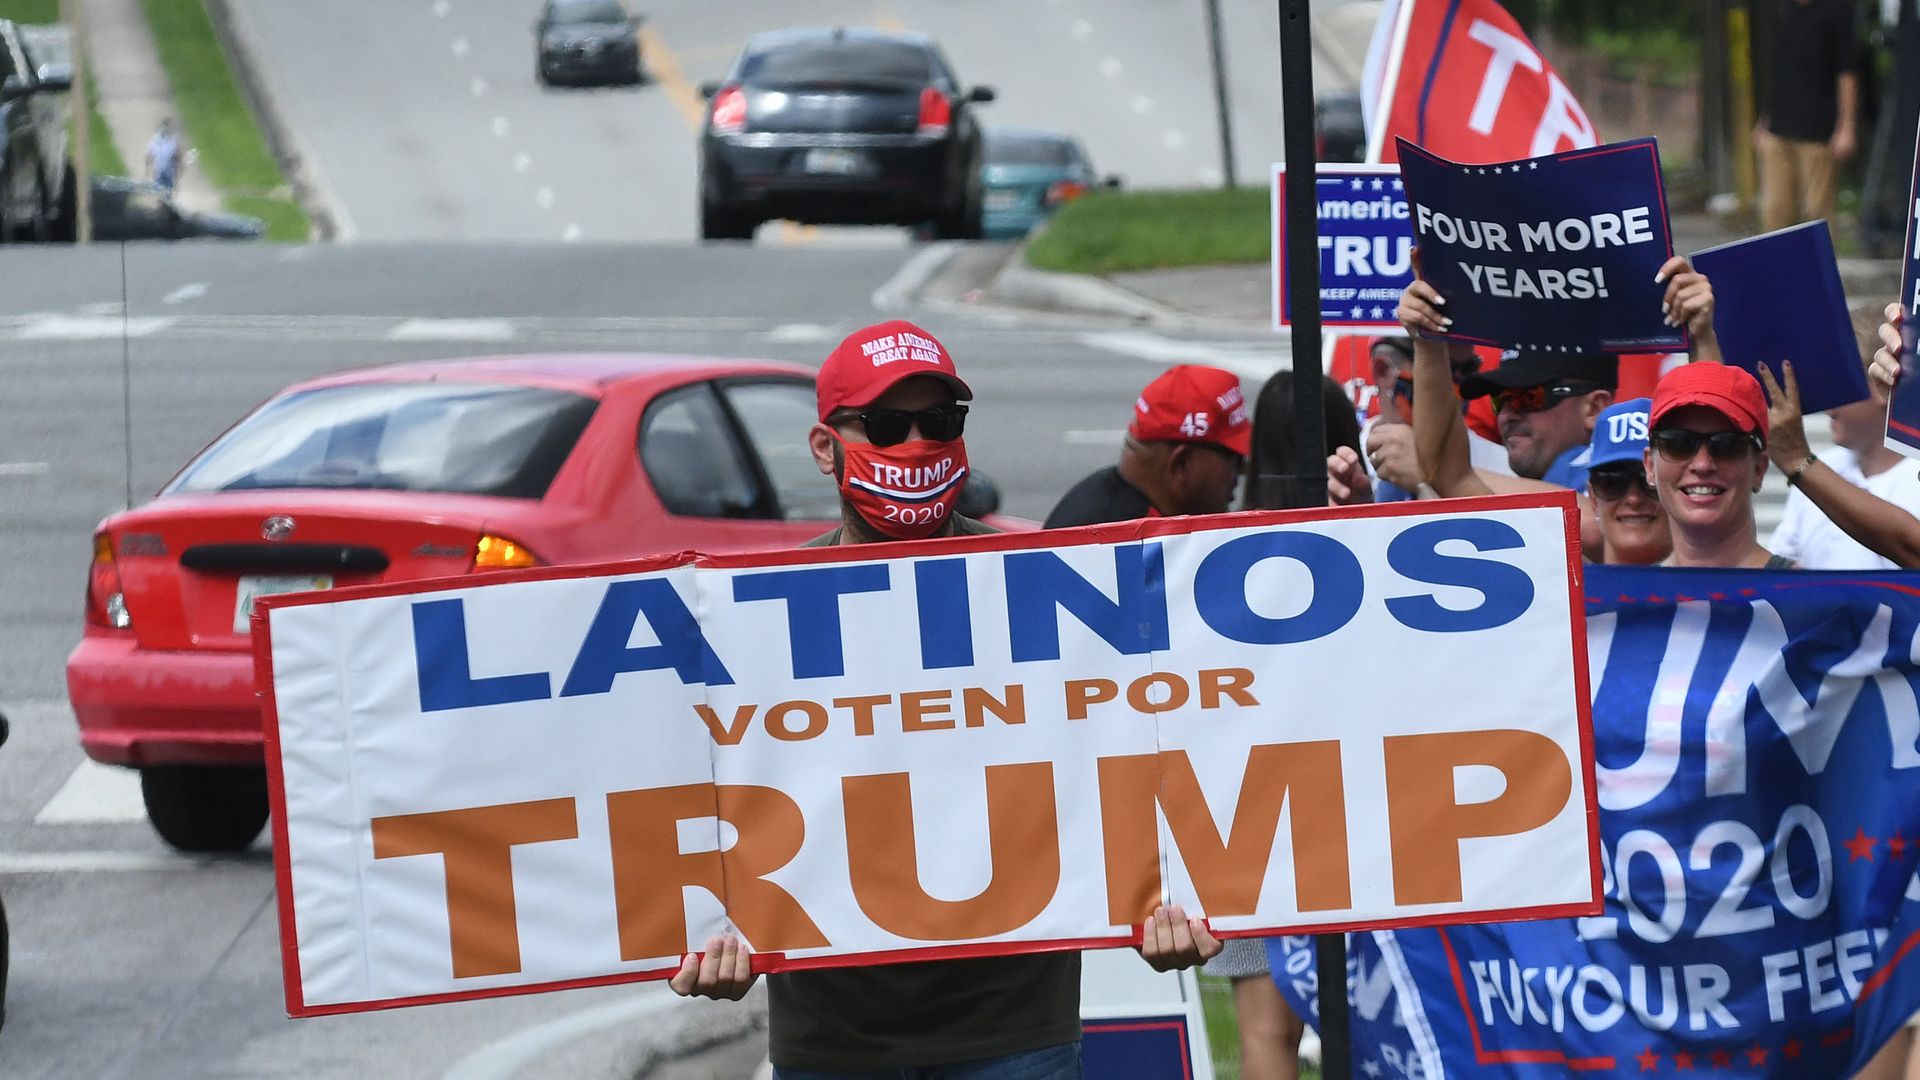 Donald Trump has gained ground over Joe Biden among Latino voters, largely attributed to their discontent with the current administration.